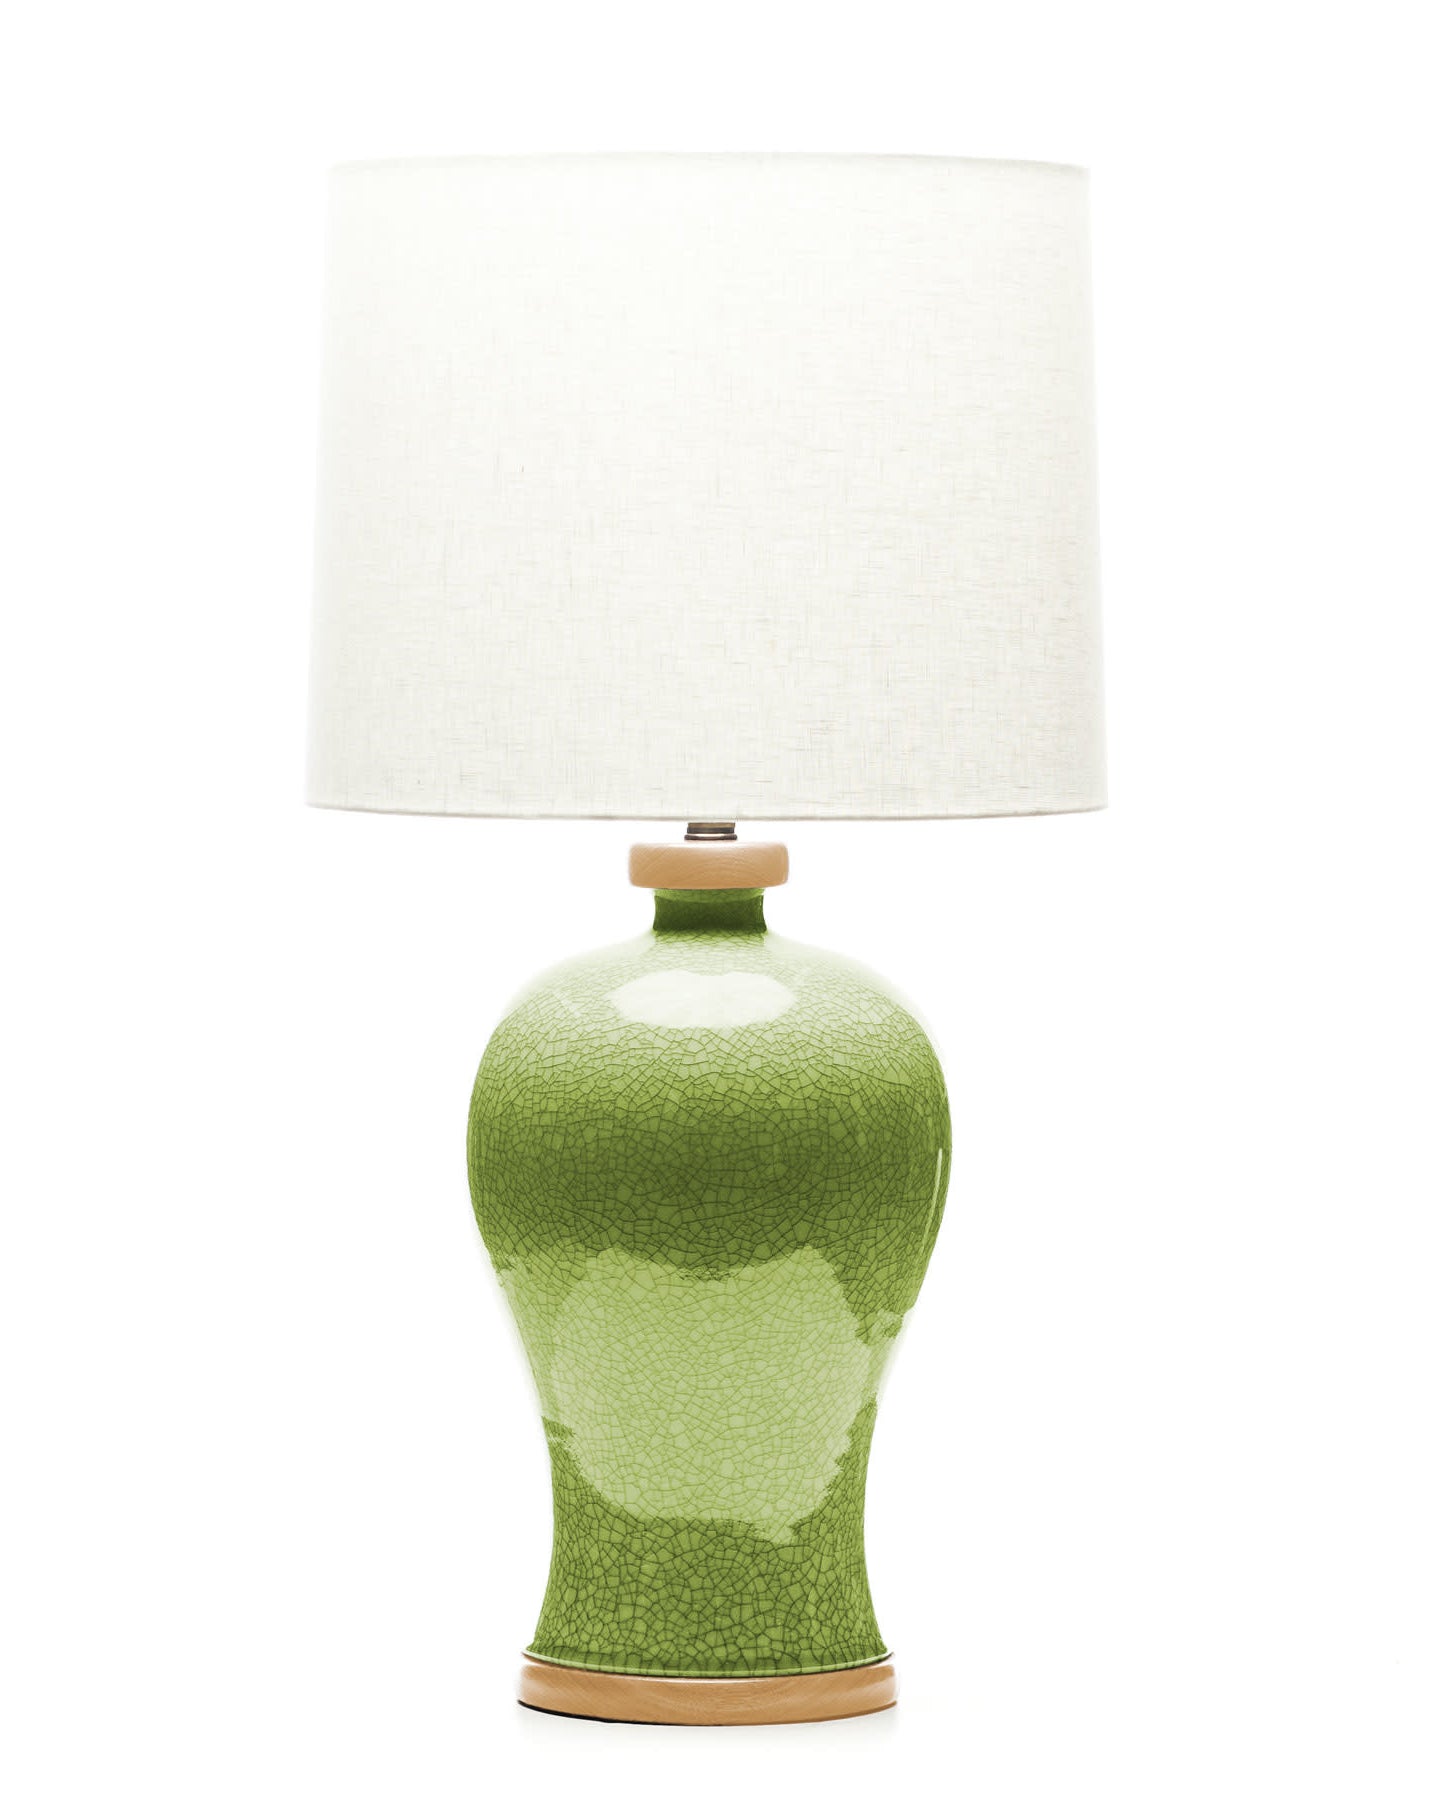 Lawrence & Scott Dashiell Table Lamp in Celadon Crackle with Oak Base